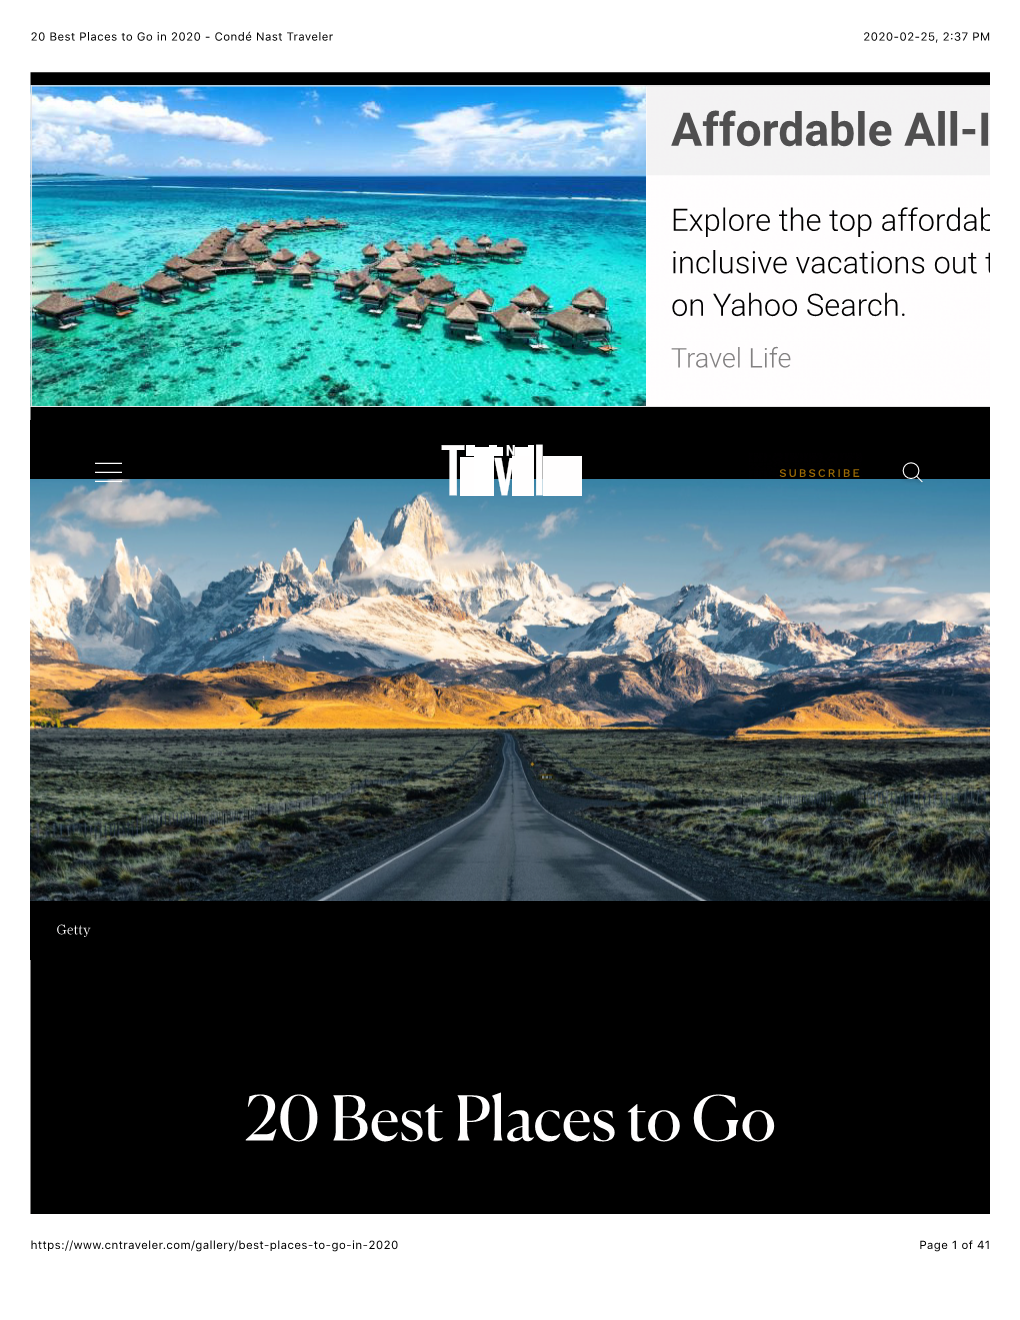 20 Best Places to Go in 2020 - Condé Nast Traveler 2020-02-25, 2:37 PM